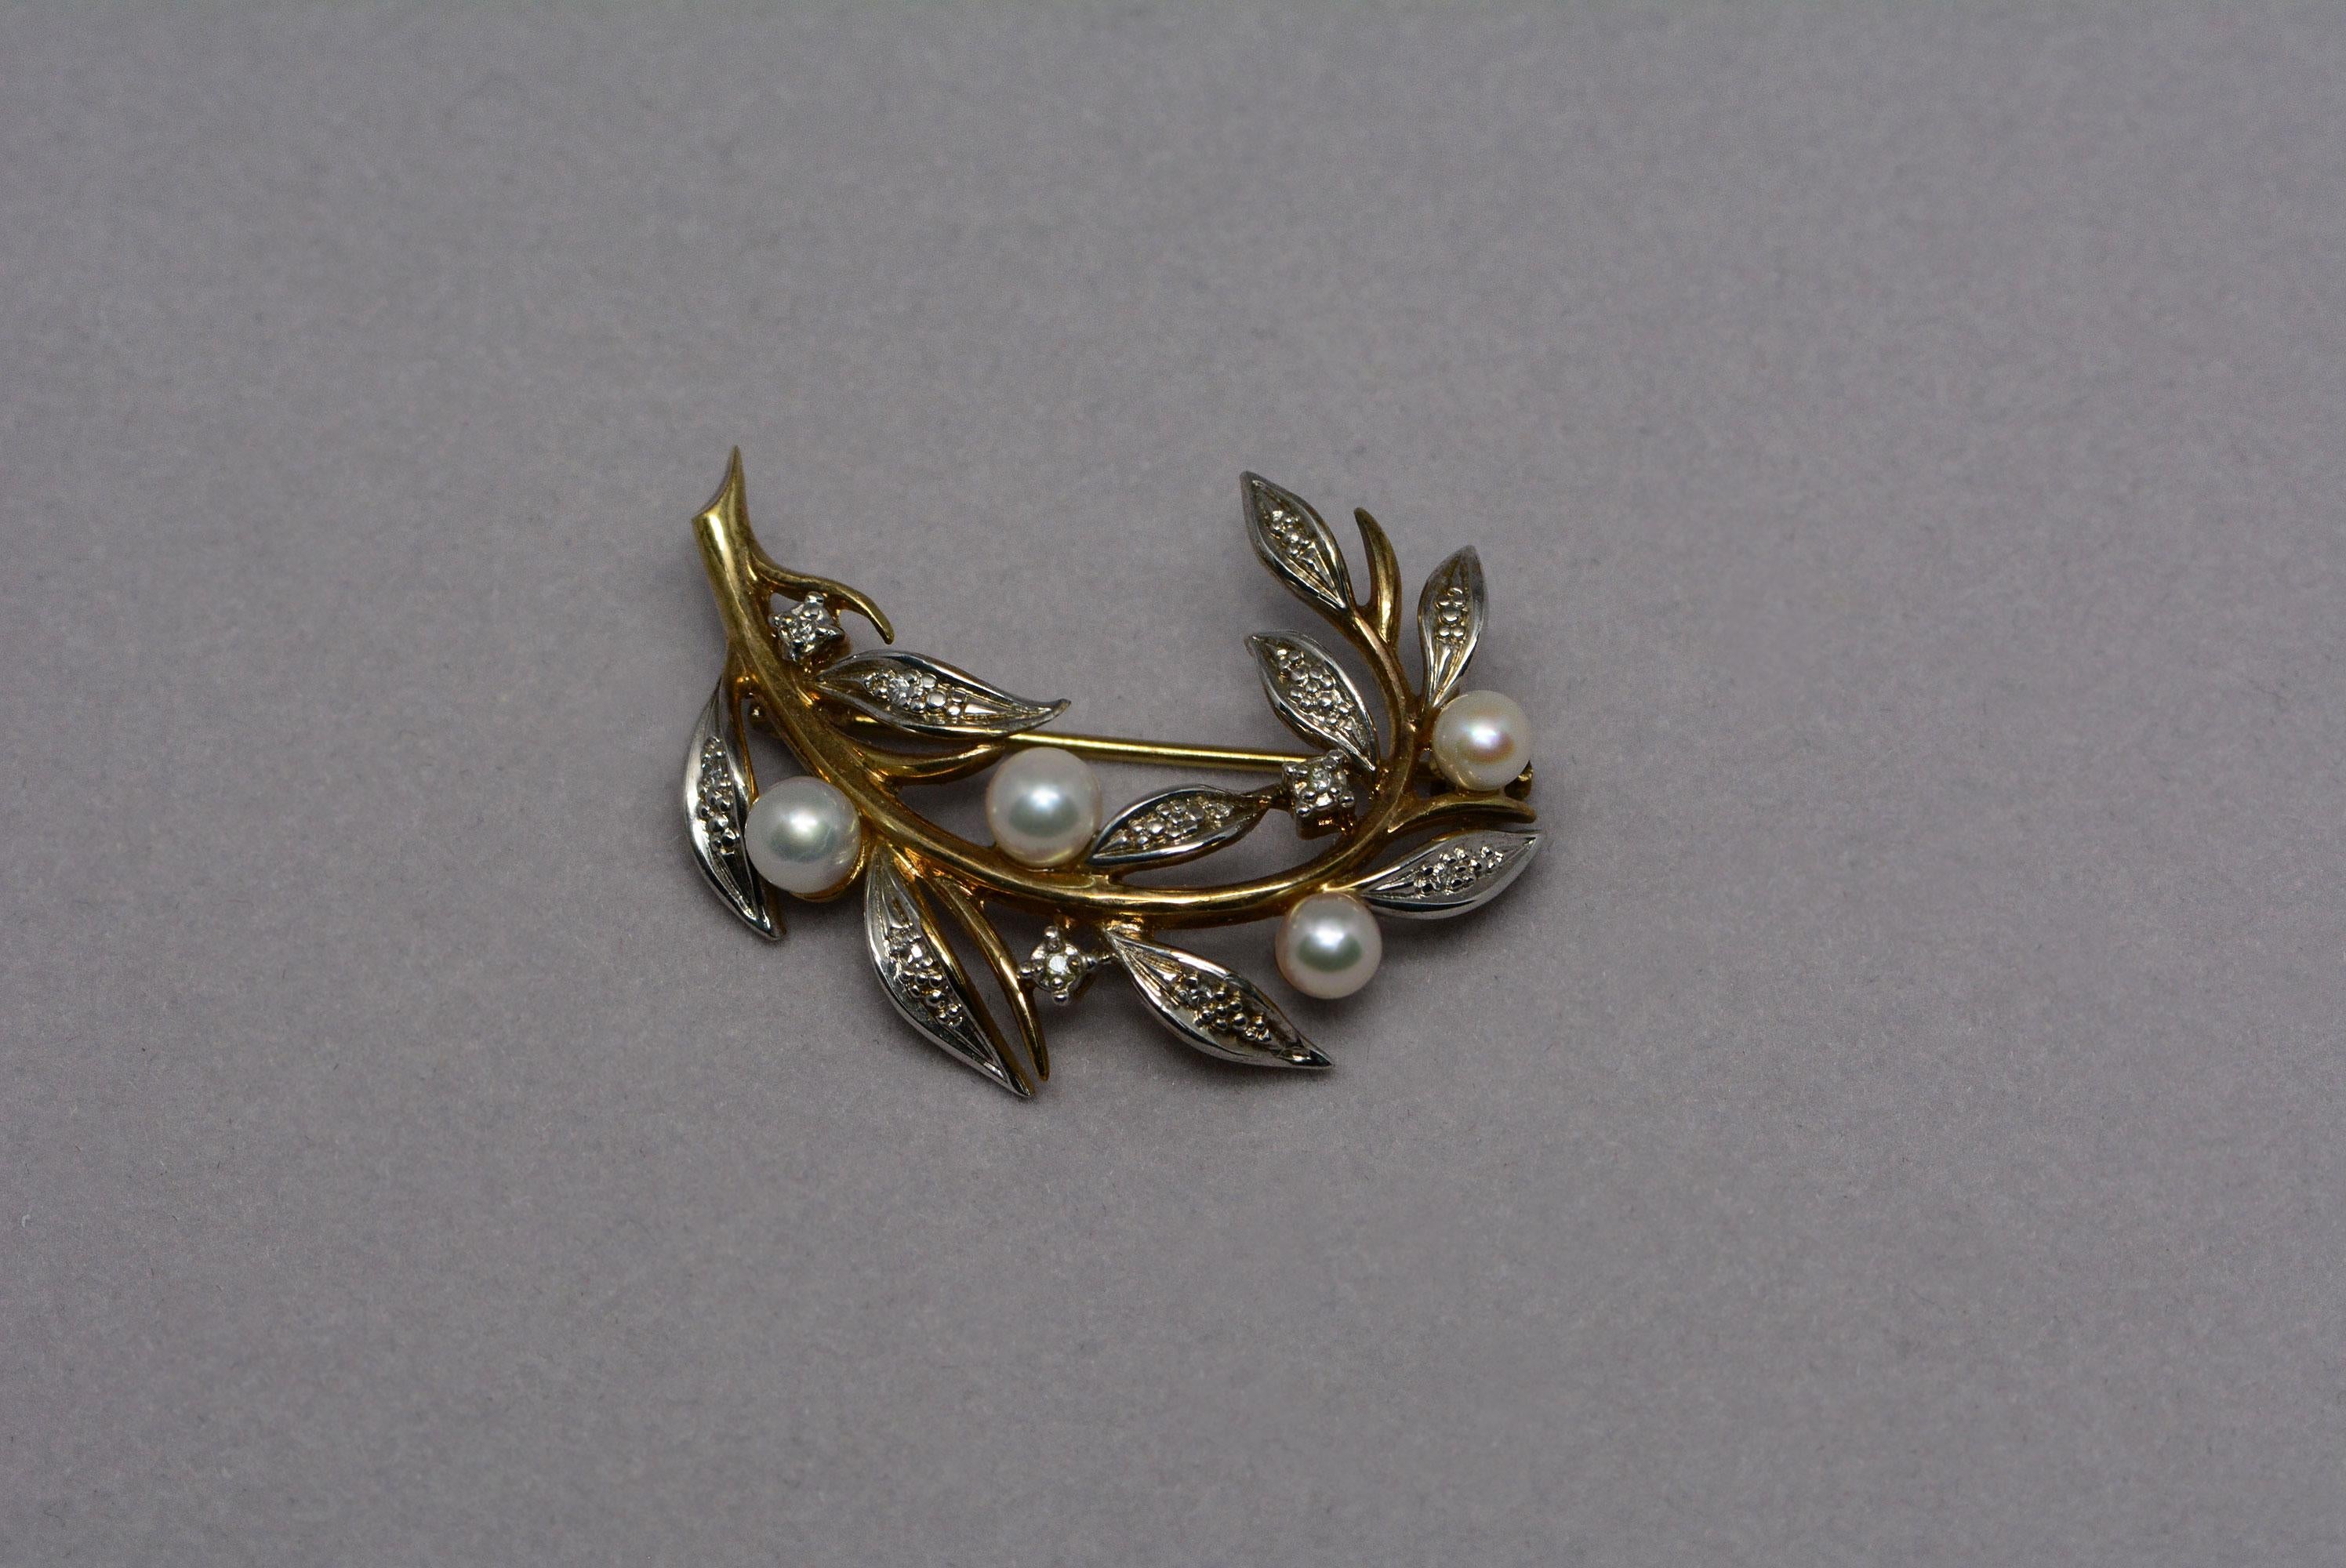 ﻿This vintage pearl brooch and earring set is made from white and yellow 9 karat gold, it has six cultured pearls and fourteen single cut diamonds set into it.

The brooch has four round cultured pearls and eight single cut diamonds which weigh: